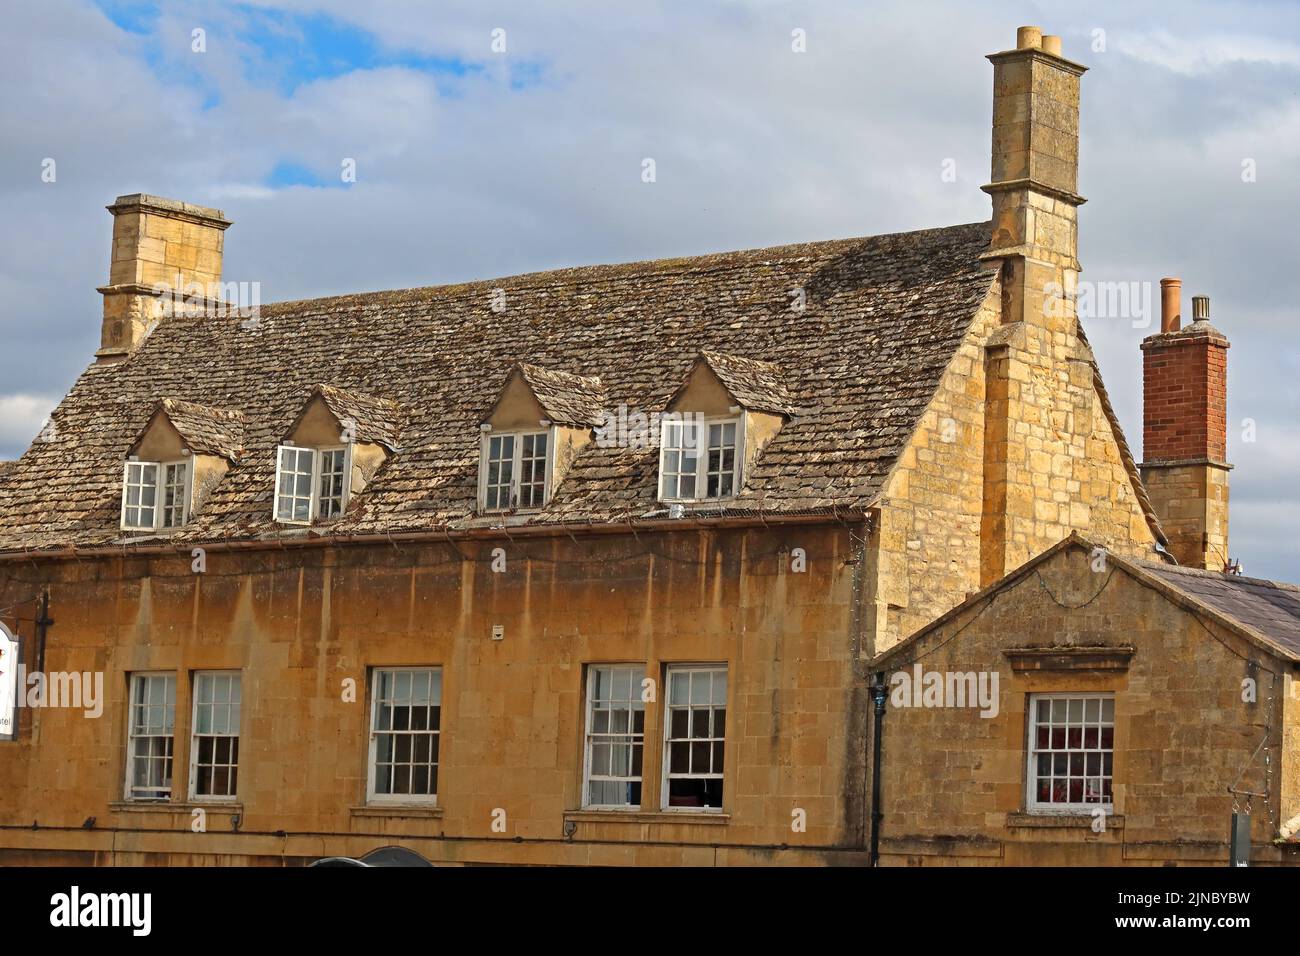 Buildings in the historic High Street, Chipping Campden, Cotswolds, Gloucestershire, England, UK, GL55 6AT Stock Photo